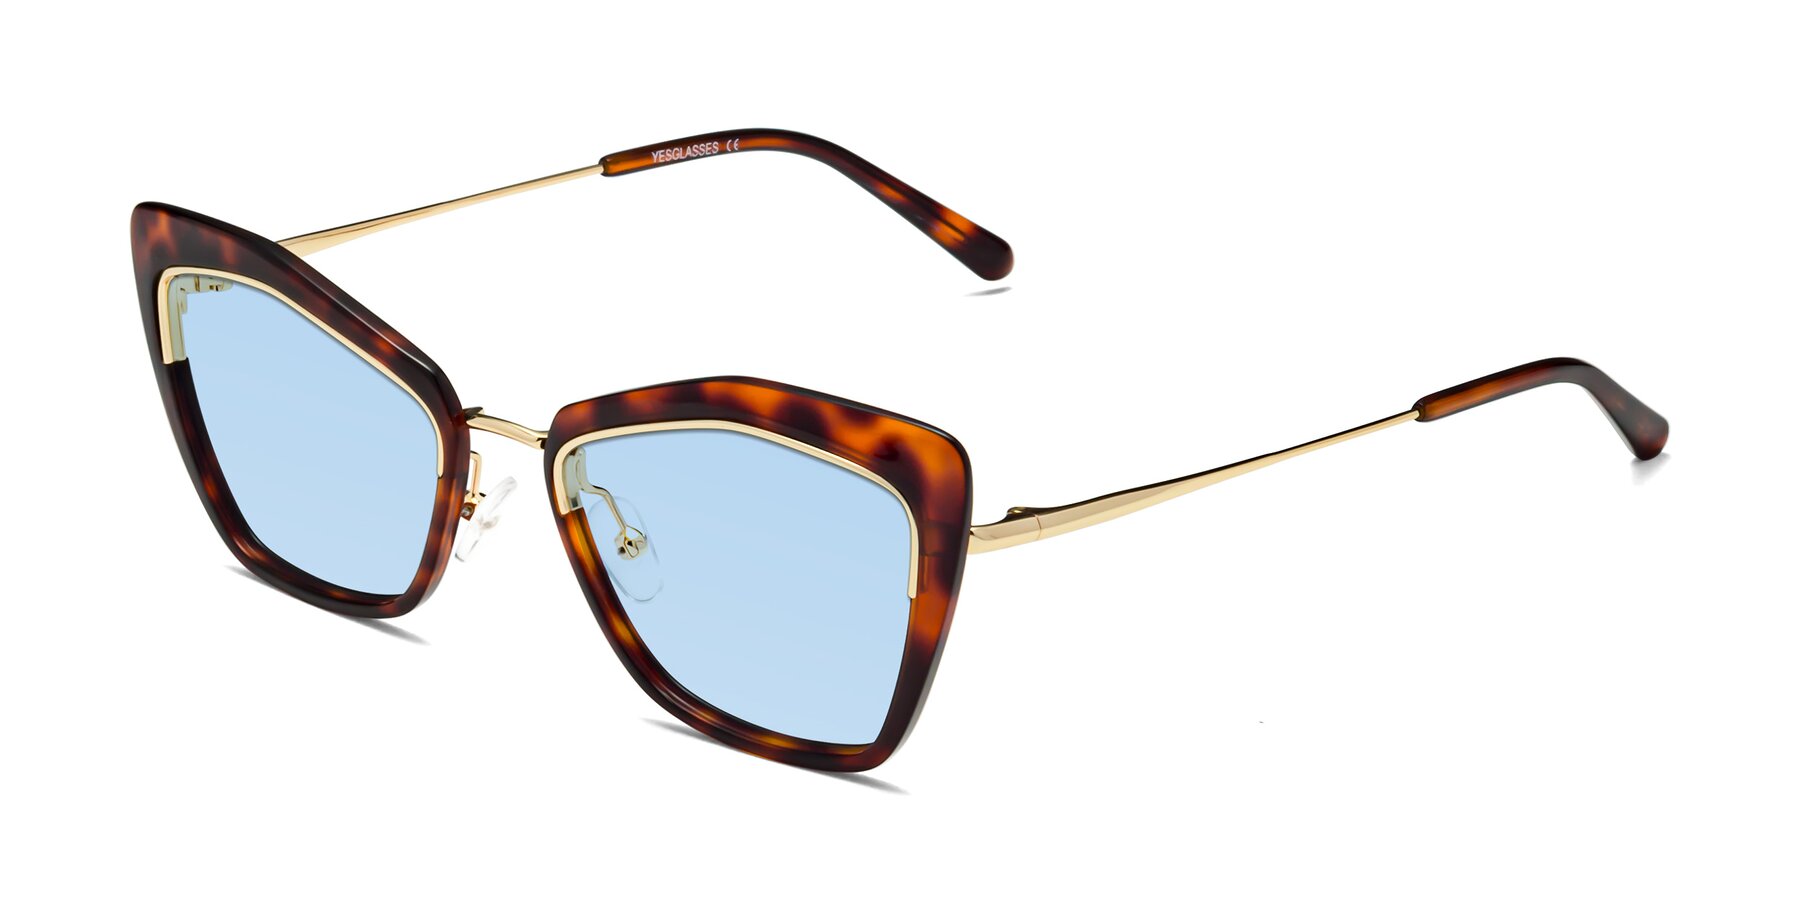 Angle of Lasso in Light Tortoise with Light Blue Tinted Lenses